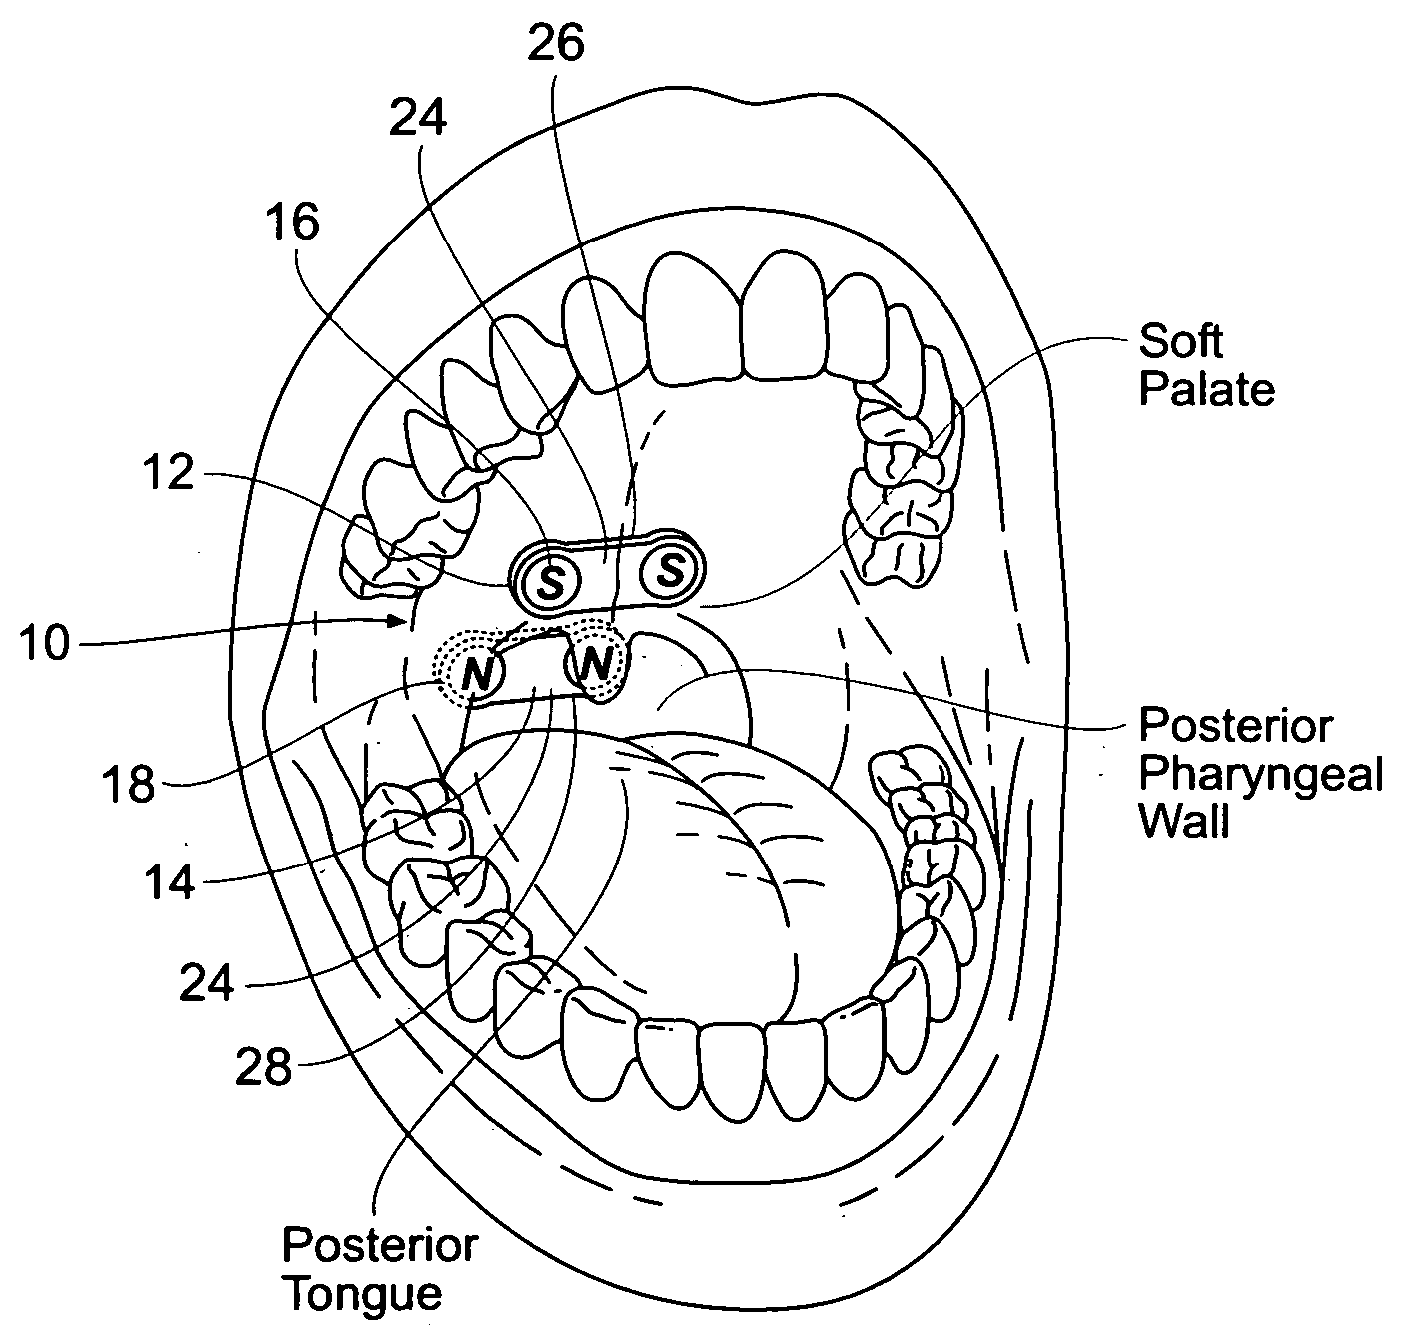 Devices, systems, and methods using magnetic force systems in or on soft palate tissue